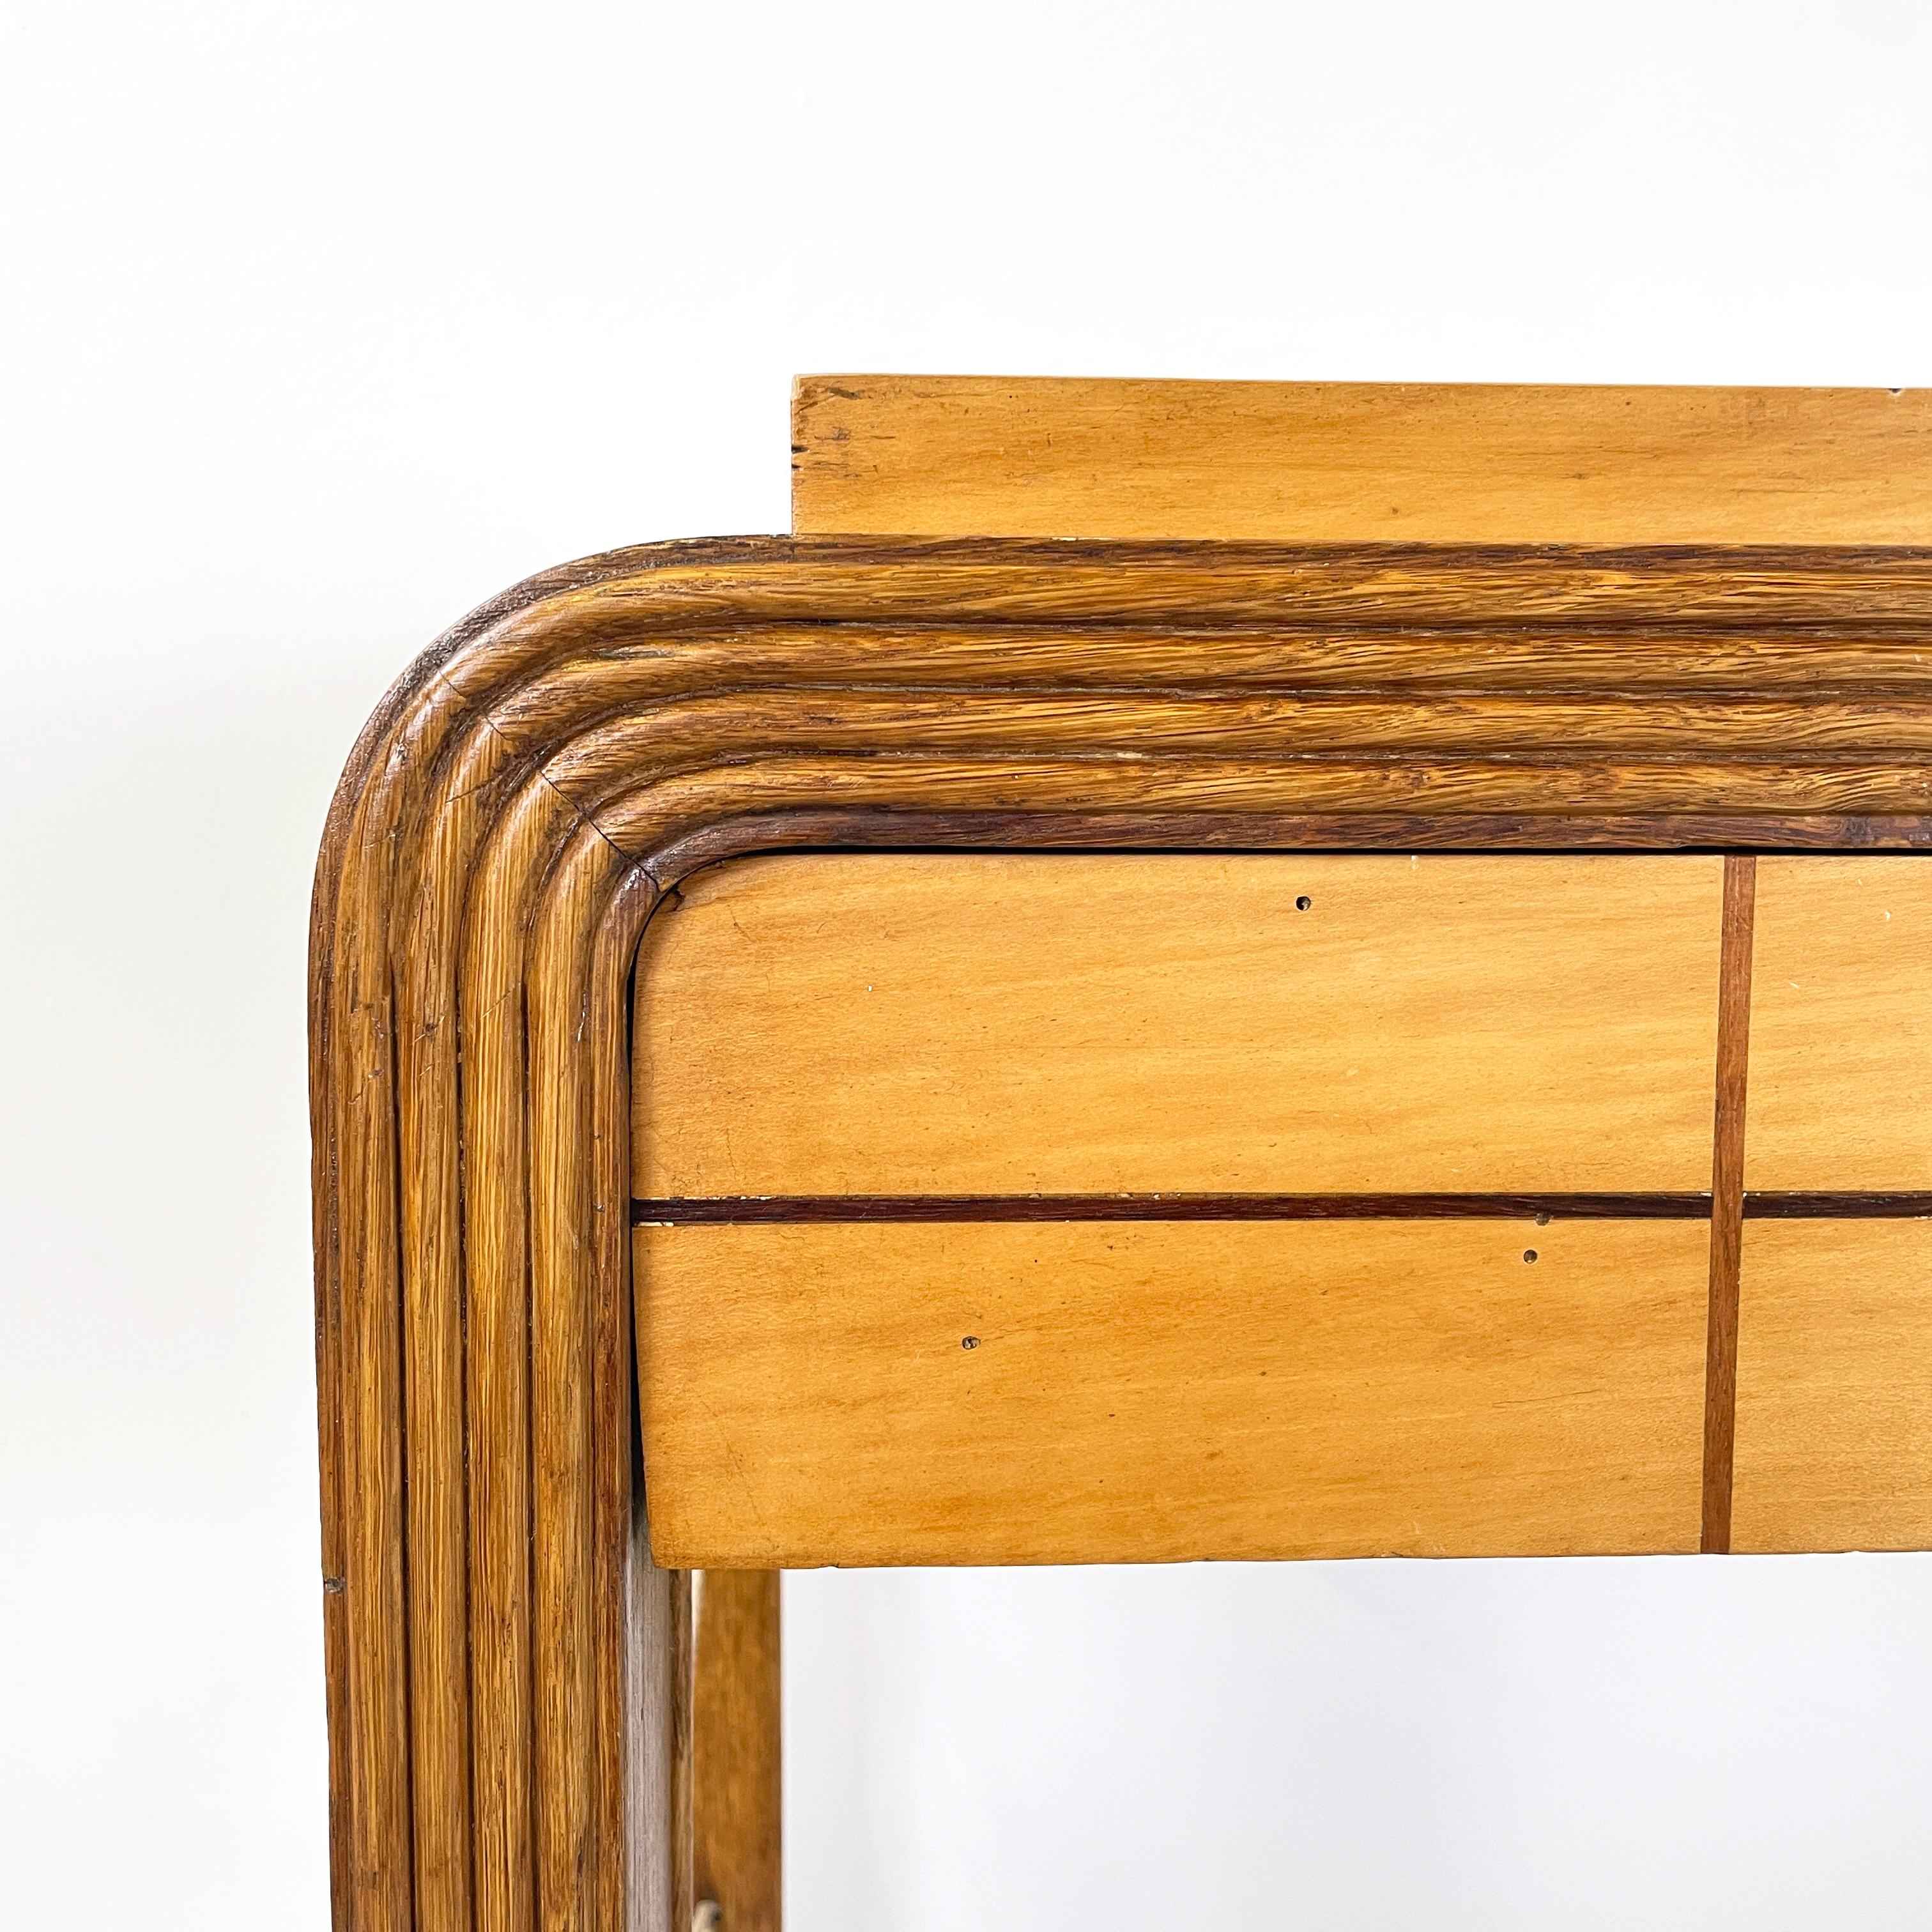 Italian art deco Console in wood with rope geometrical details, 1950s For Sale 3